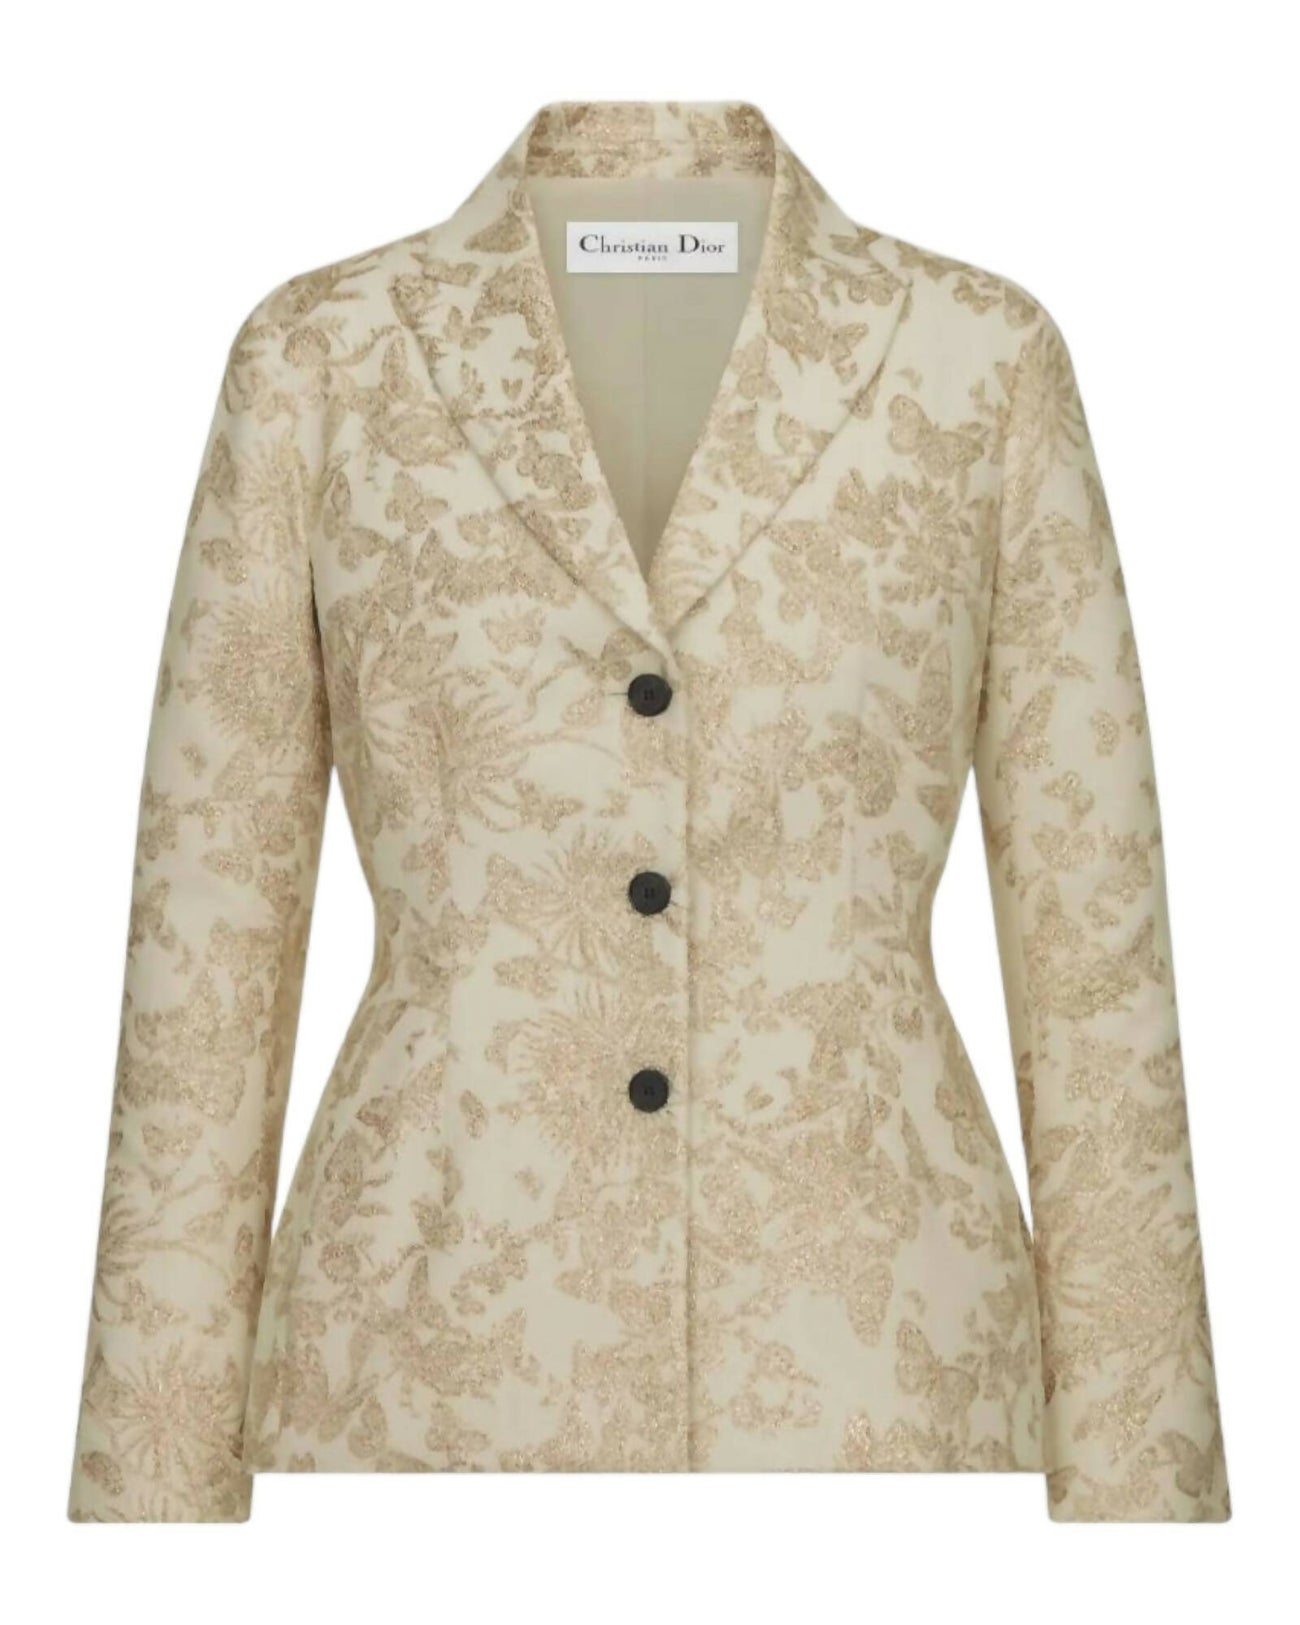 Christian Dior, Technical Jacquard Fitted Jacket